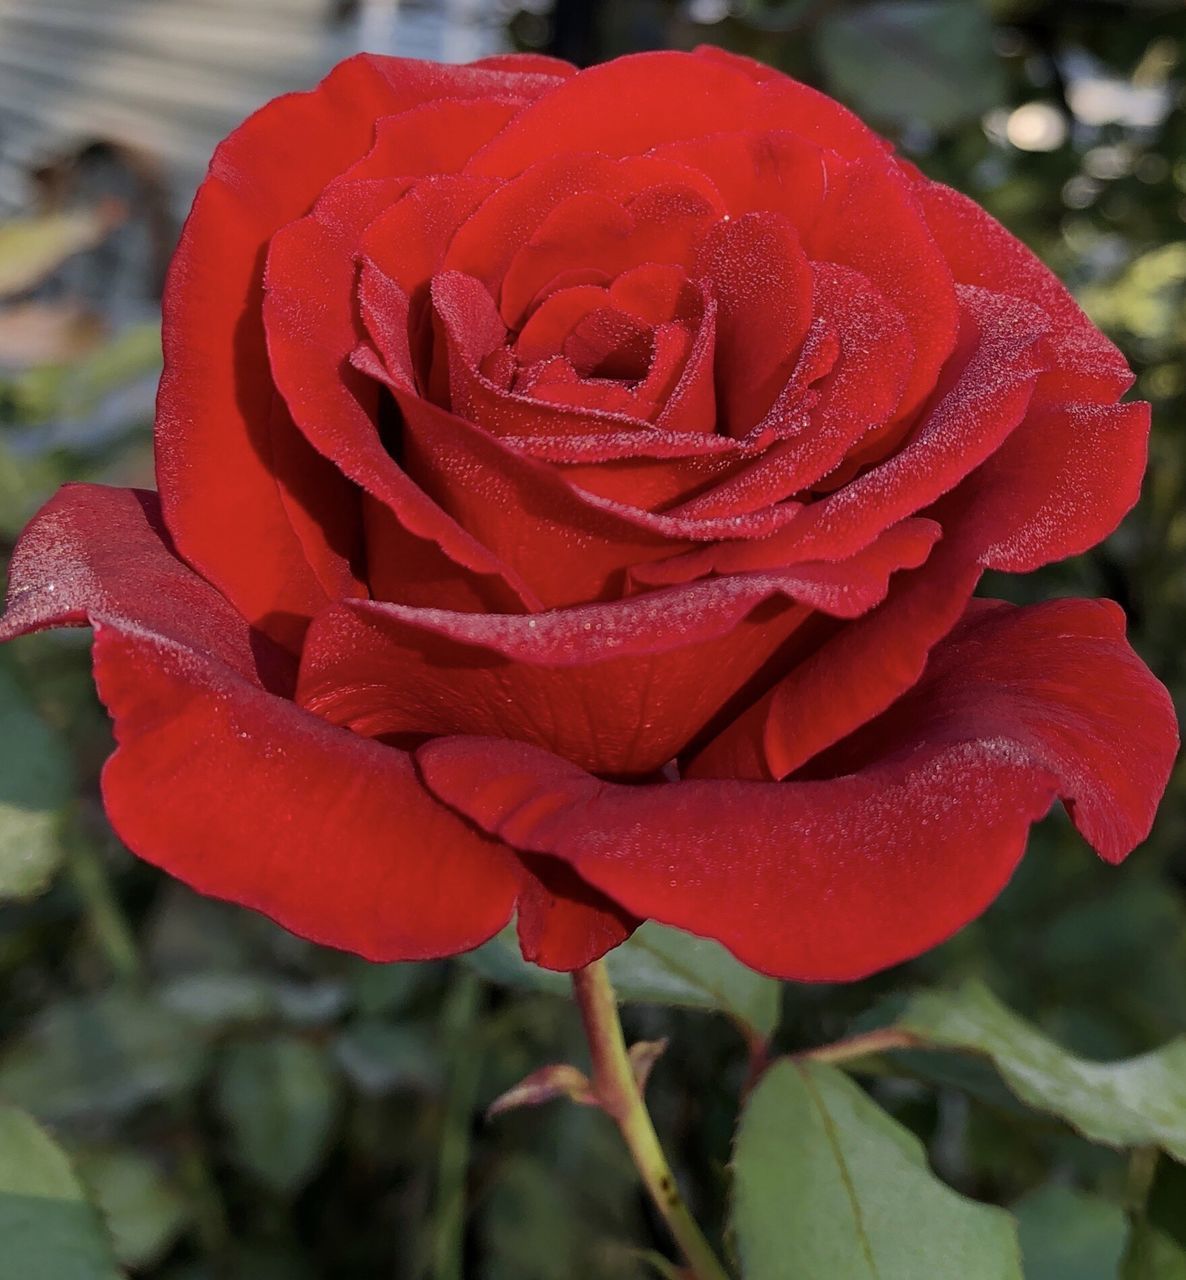 CLOSE-UP OF RED ROSE IN GARDEN